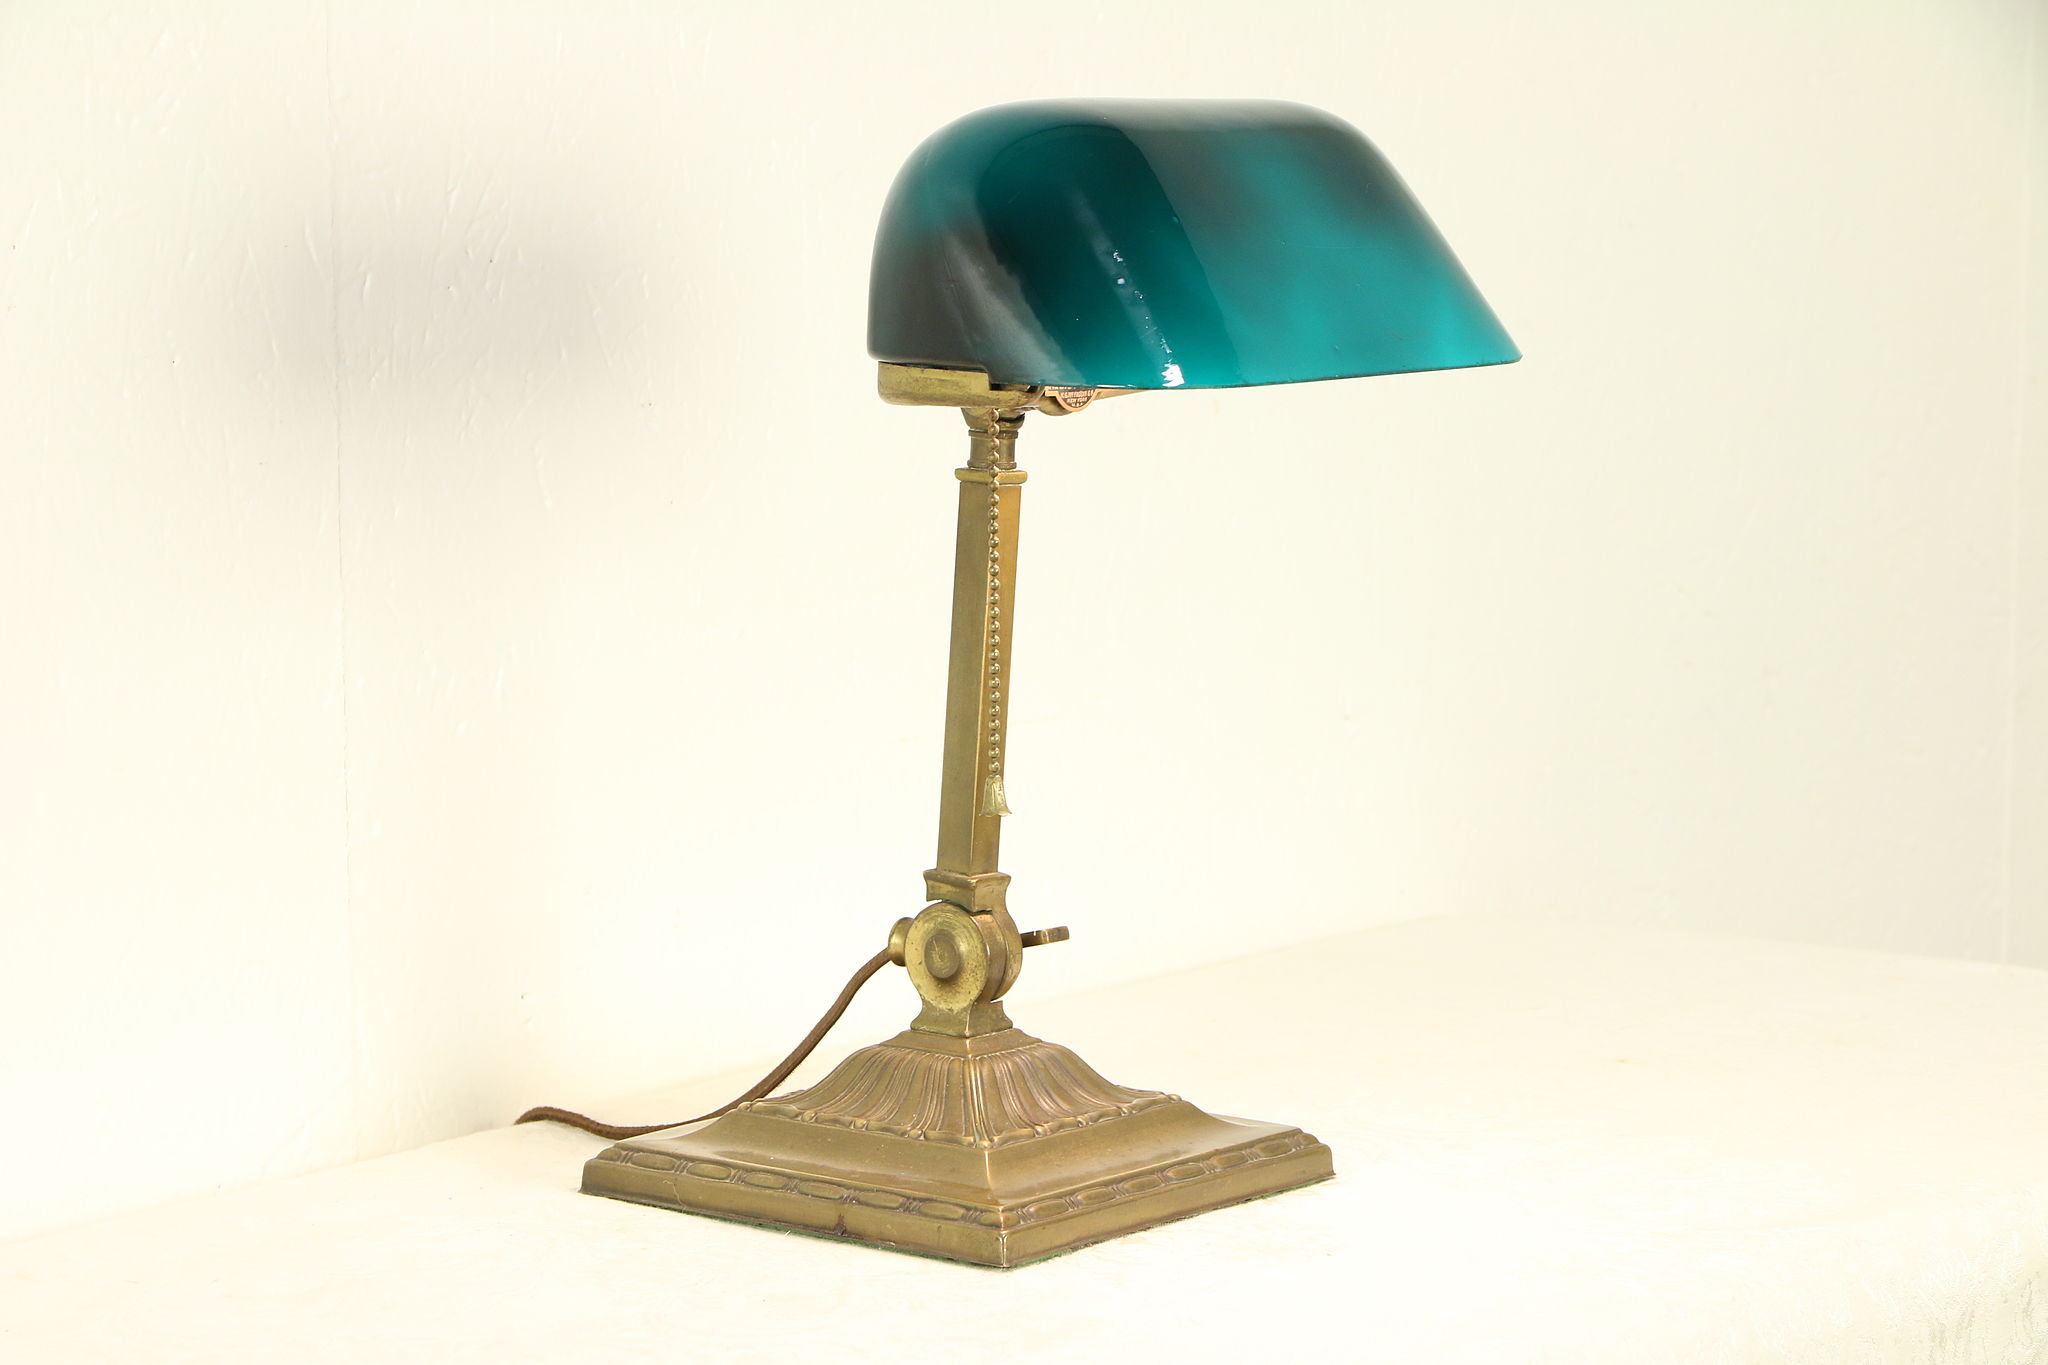 bankers desk lamp green glass shade